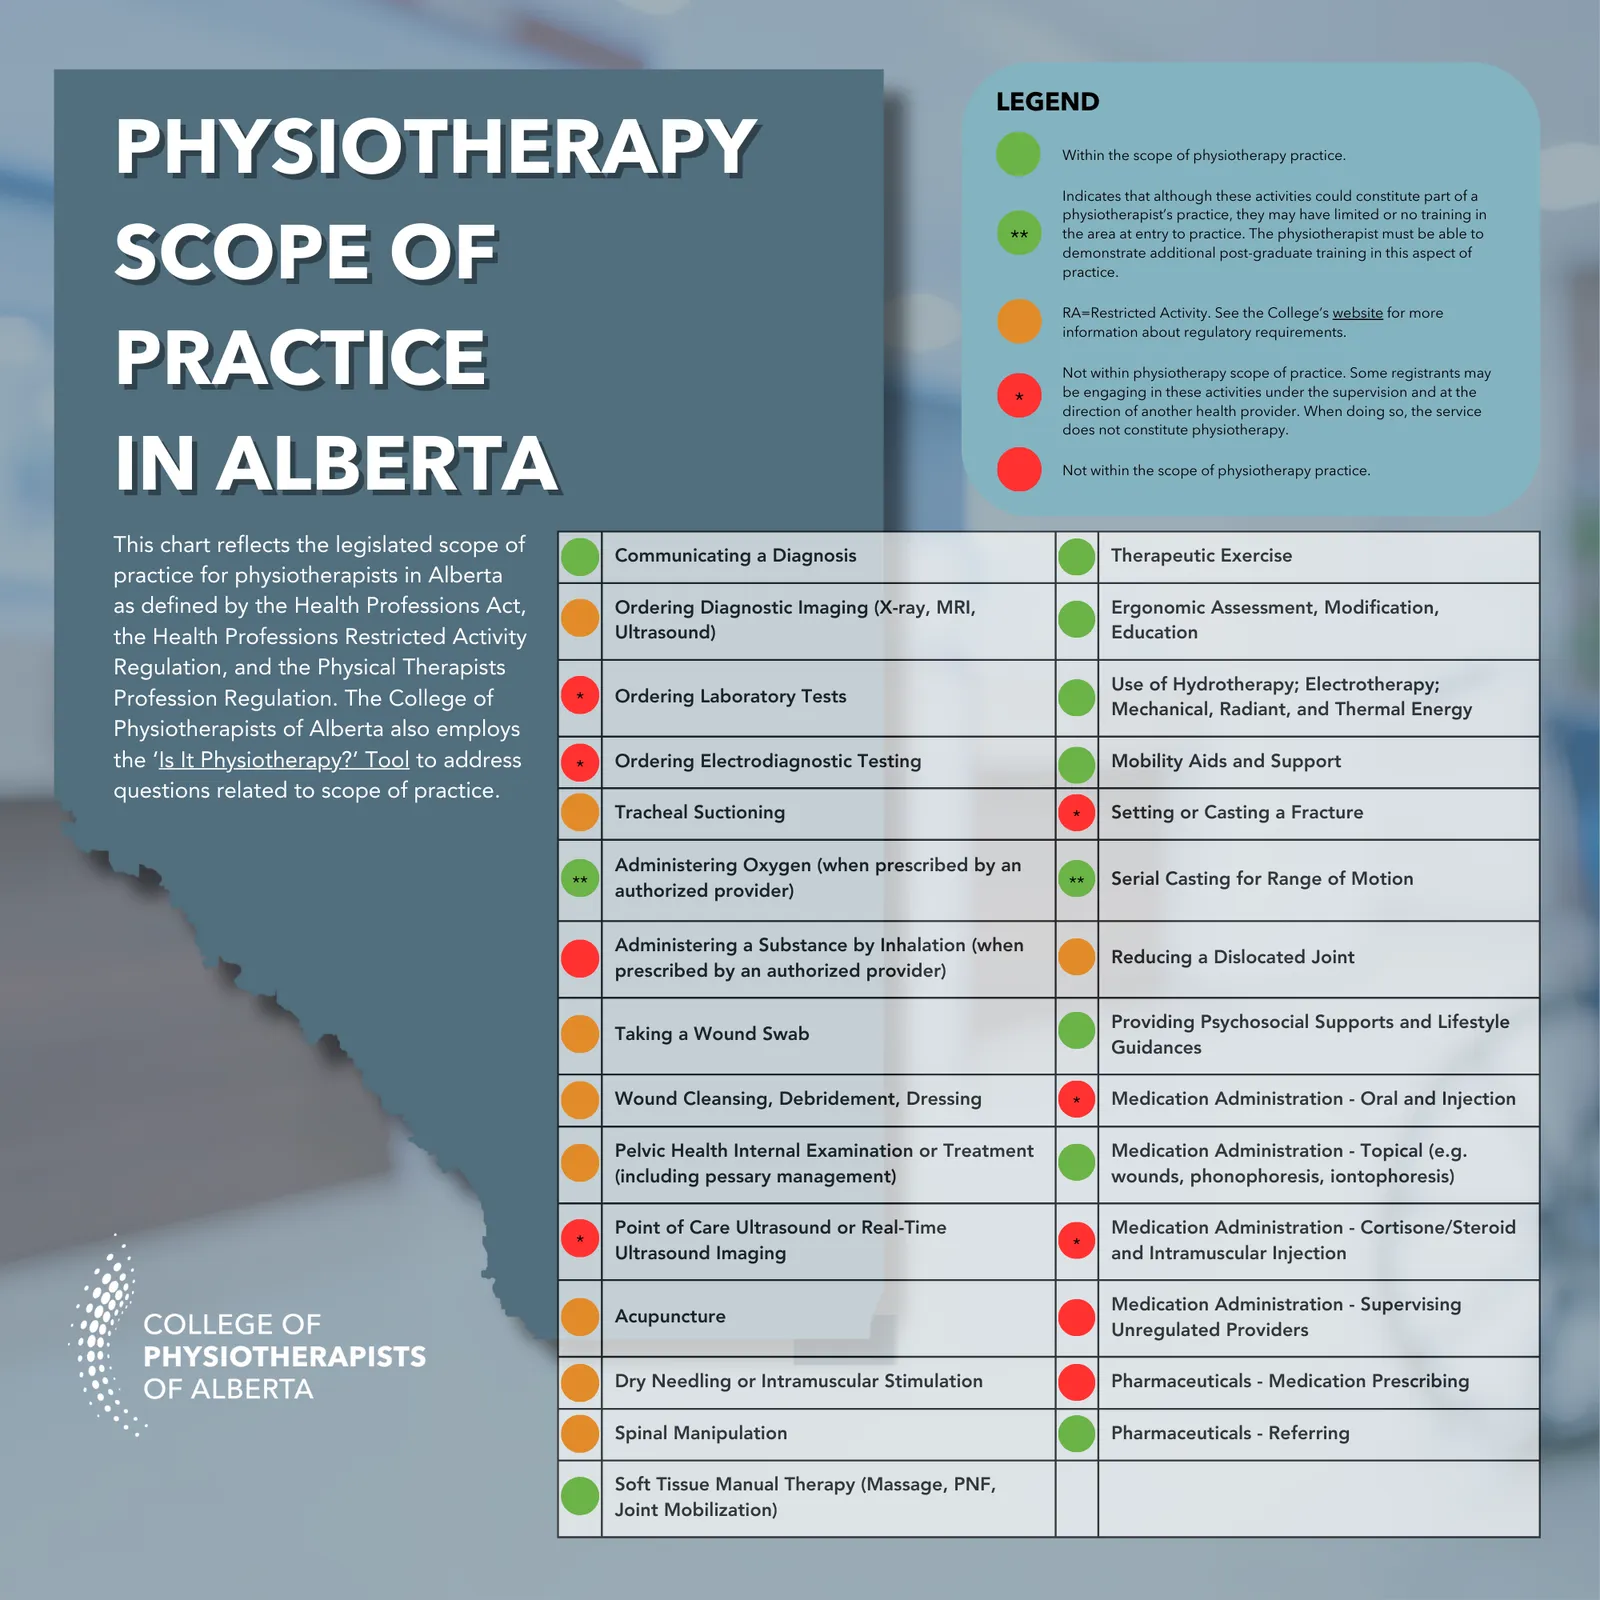 Physiotherapy Scope of Practice in Alberta Infographic